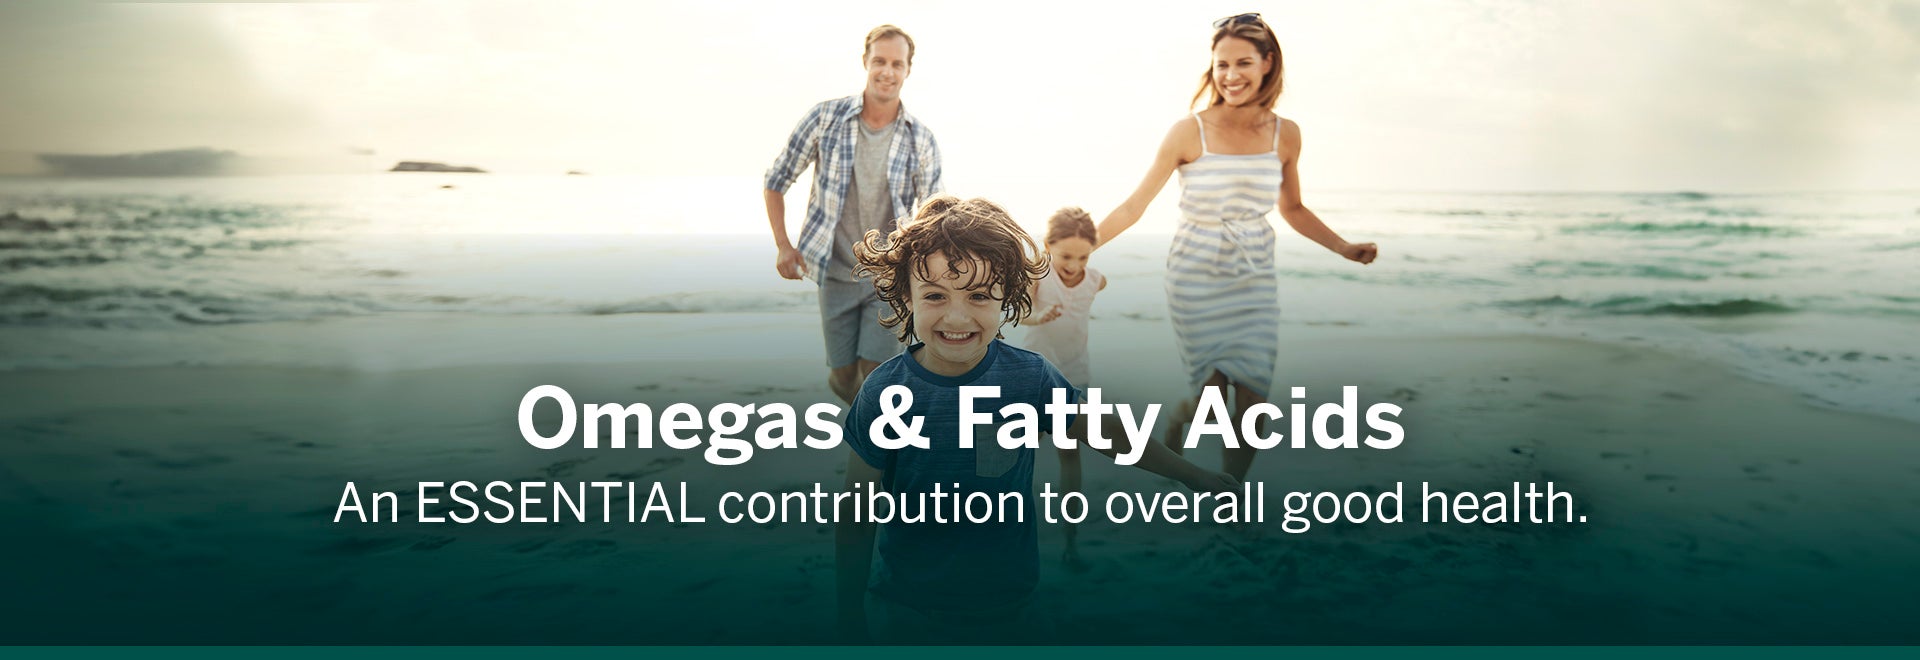 Omegas & fatty acids is an essential contribution to overall good health. A picture of a family smiling and running at the beach.